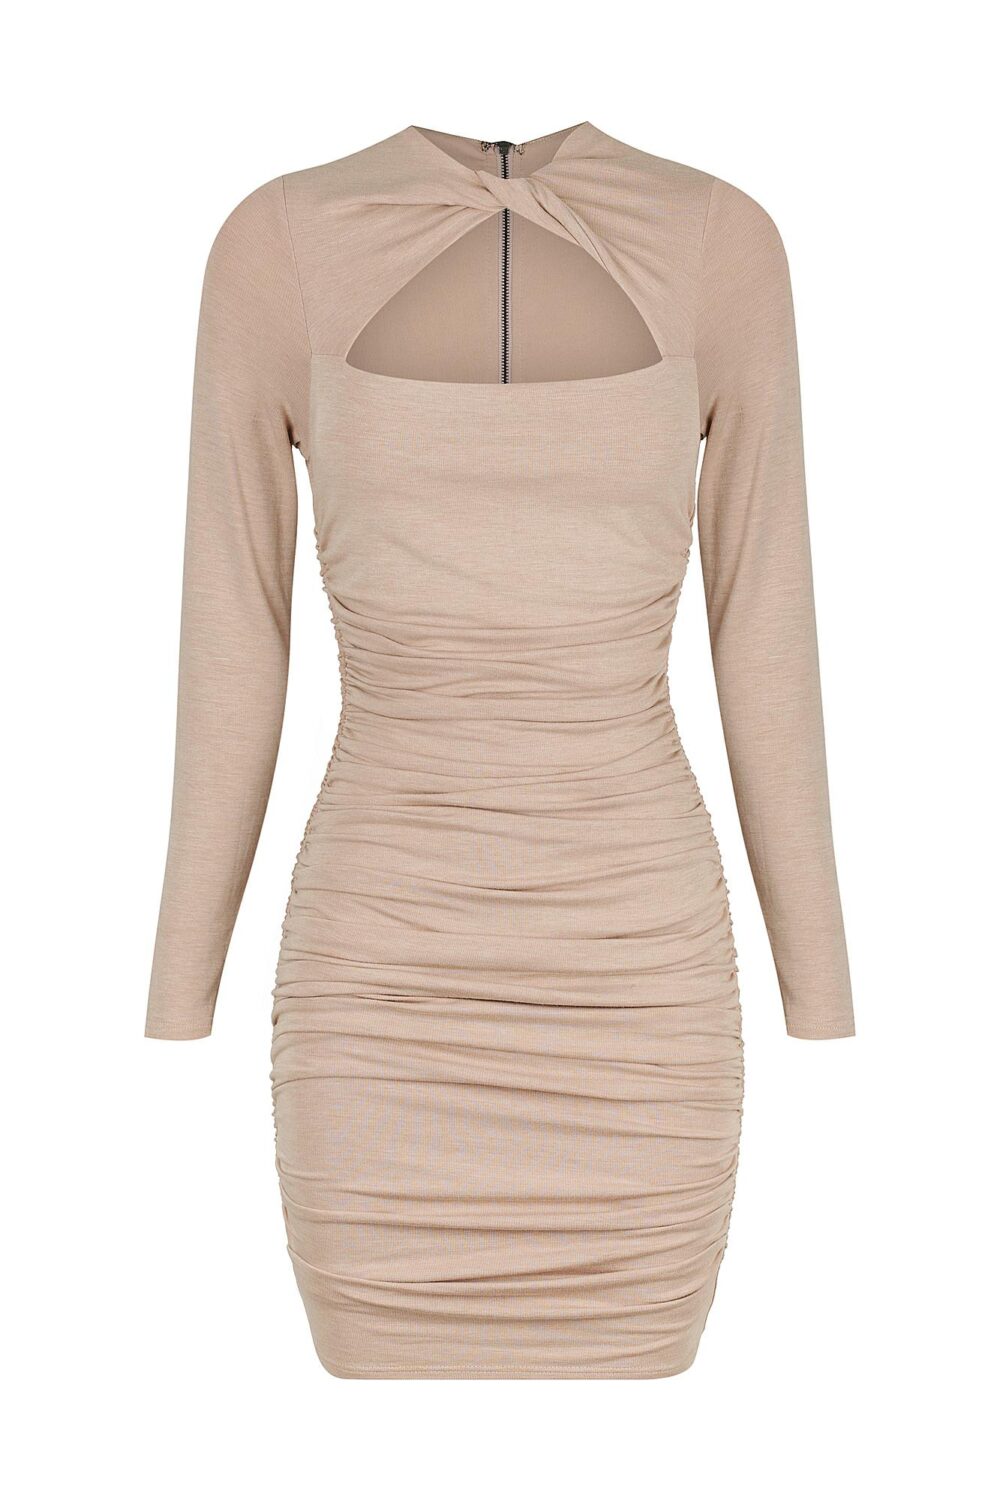 Ladies Dress Colour is Oatmeal